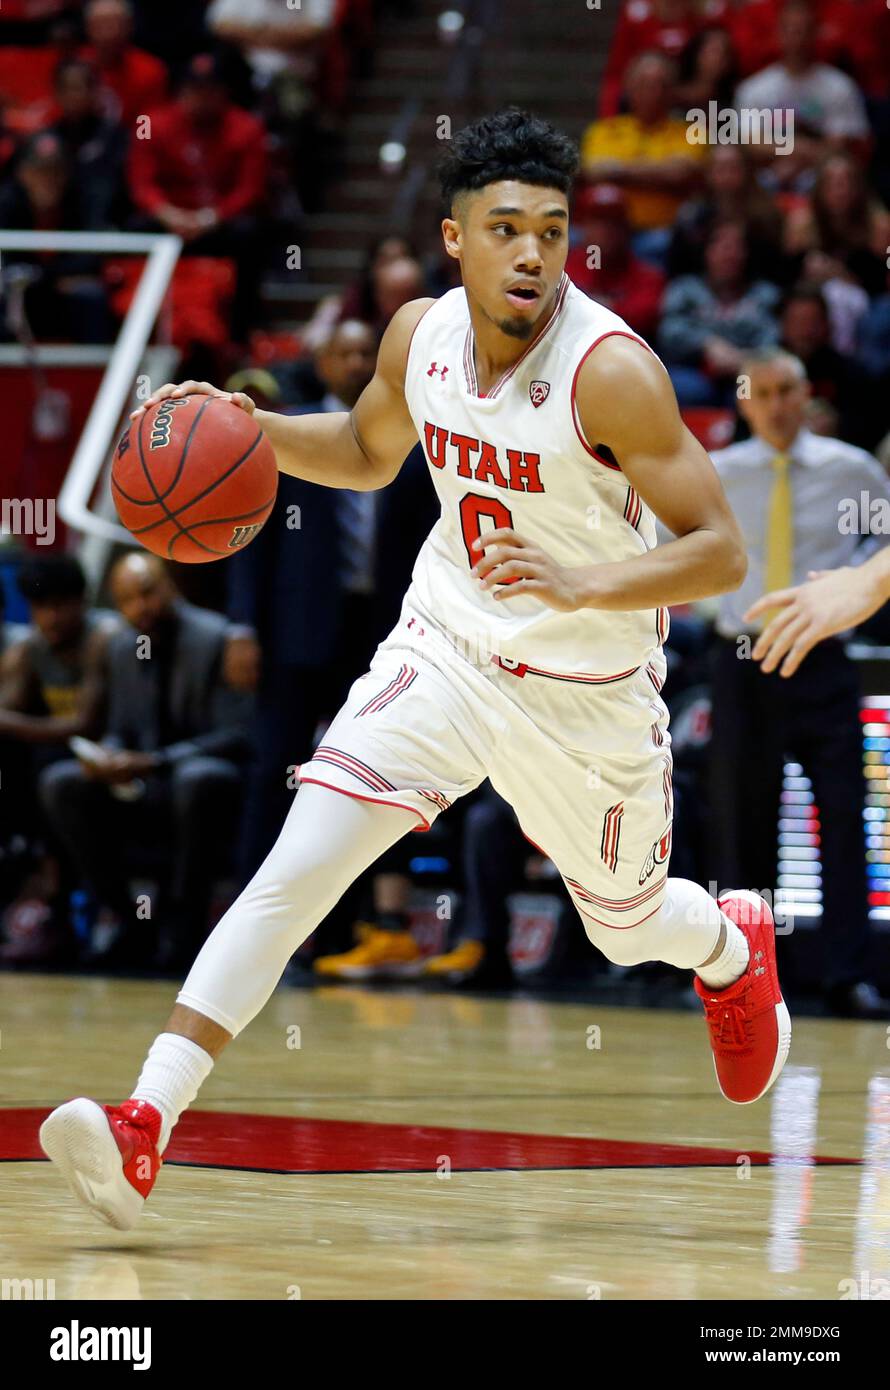 FILE - In this Jan. 7, 2018, file photo, Utah guard Sedrick Barefield (0) brings the ball up court in the second half during an NCAA college basketball game against Arizona State, in Salt Lake City. The 6-foot-2 senior emerged as one of Utah's most dangerous shooters, averaging 12.0 points per game while converting 35.4 percent of his shots from 3-point range.(AP Photo/Rick Bowmer, File) Stock Photo